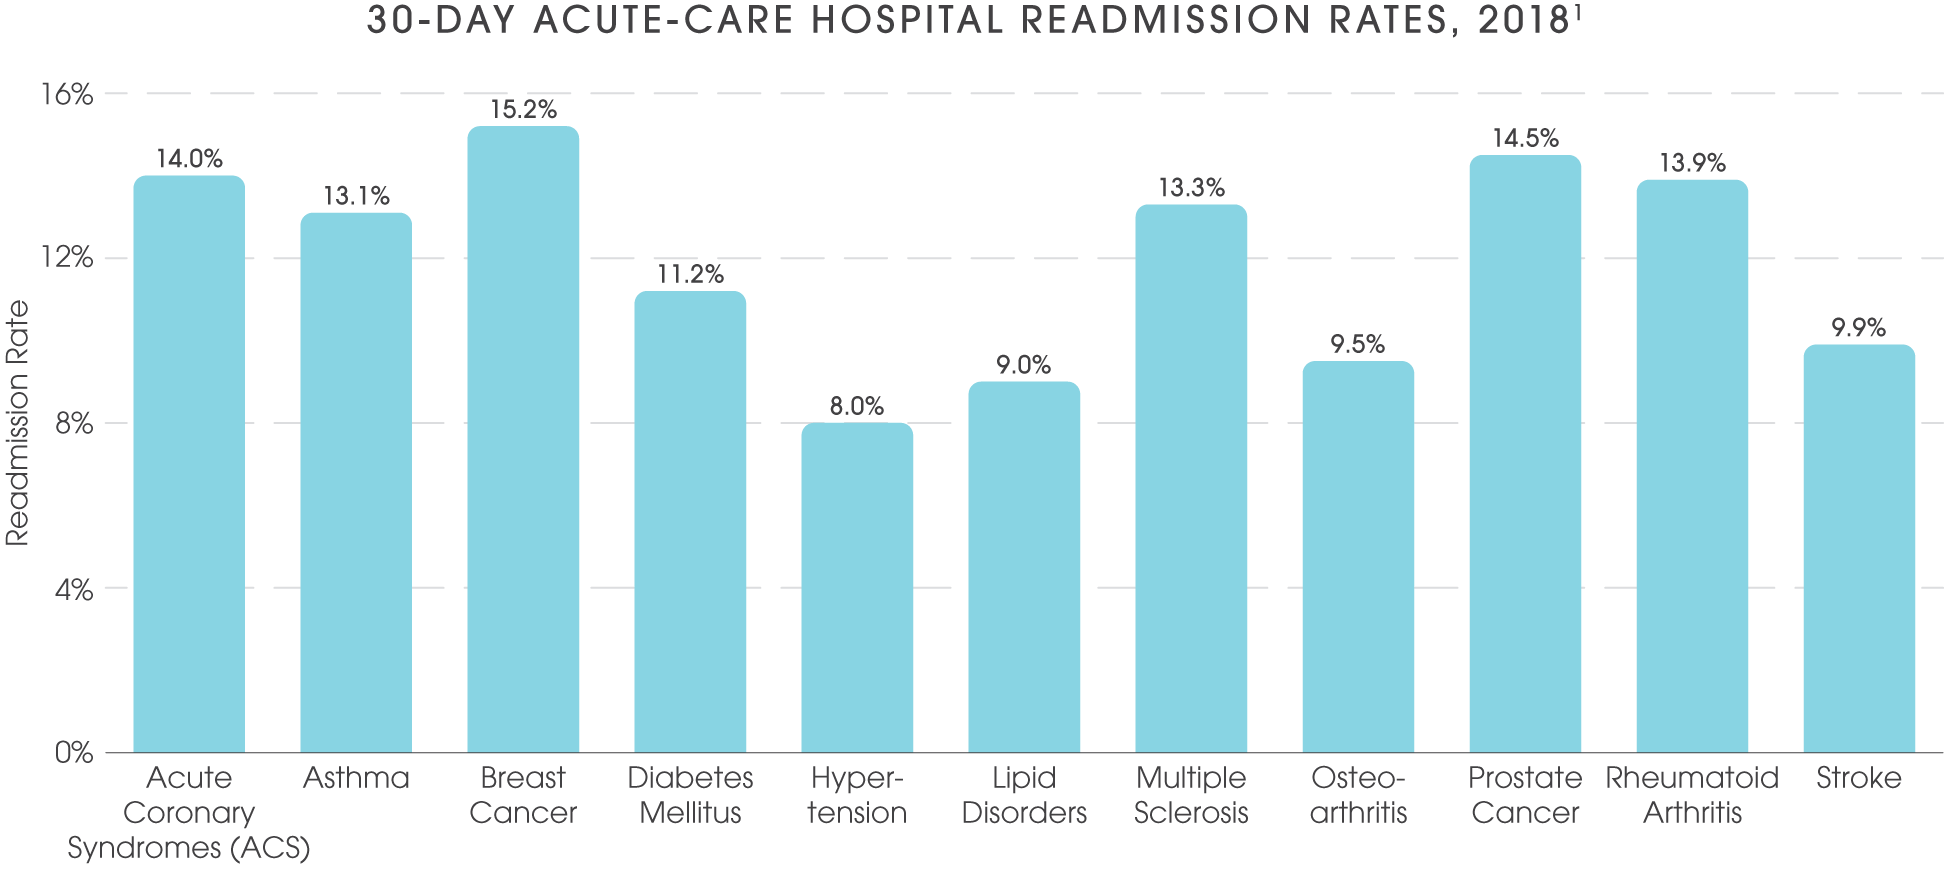 30 -DAY ACUTE-CARE HOSPITAL READMISSION RATES, 2018